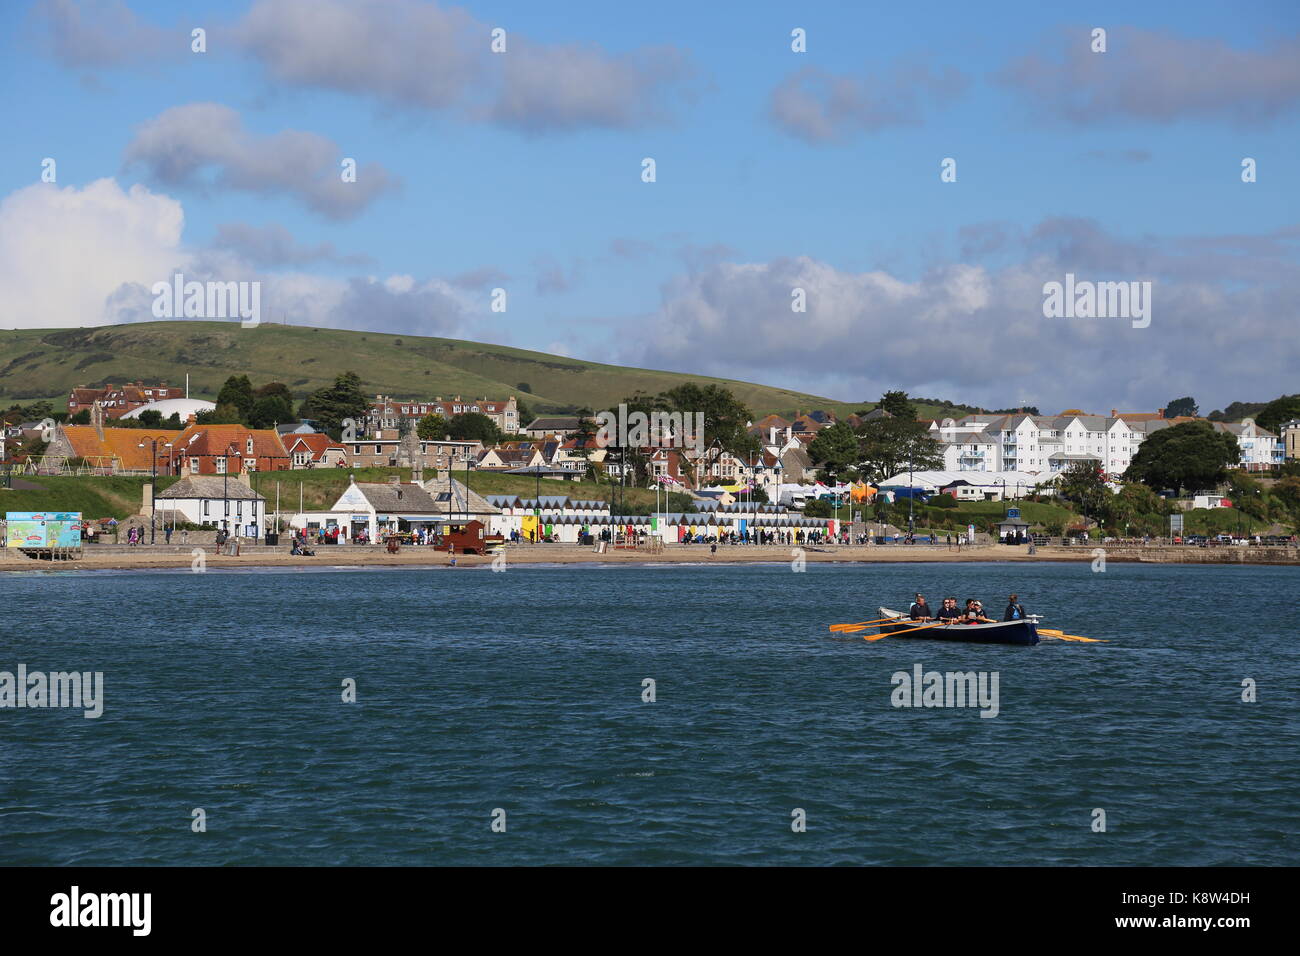 Swanage Sea Rowing Club 'Tilly Whim' pilot gig in Swanage Bay, Swanage, Isle of Purbeck, Dorset, England, Great Britain, United Kingdom, UK, Europe Stock Photo